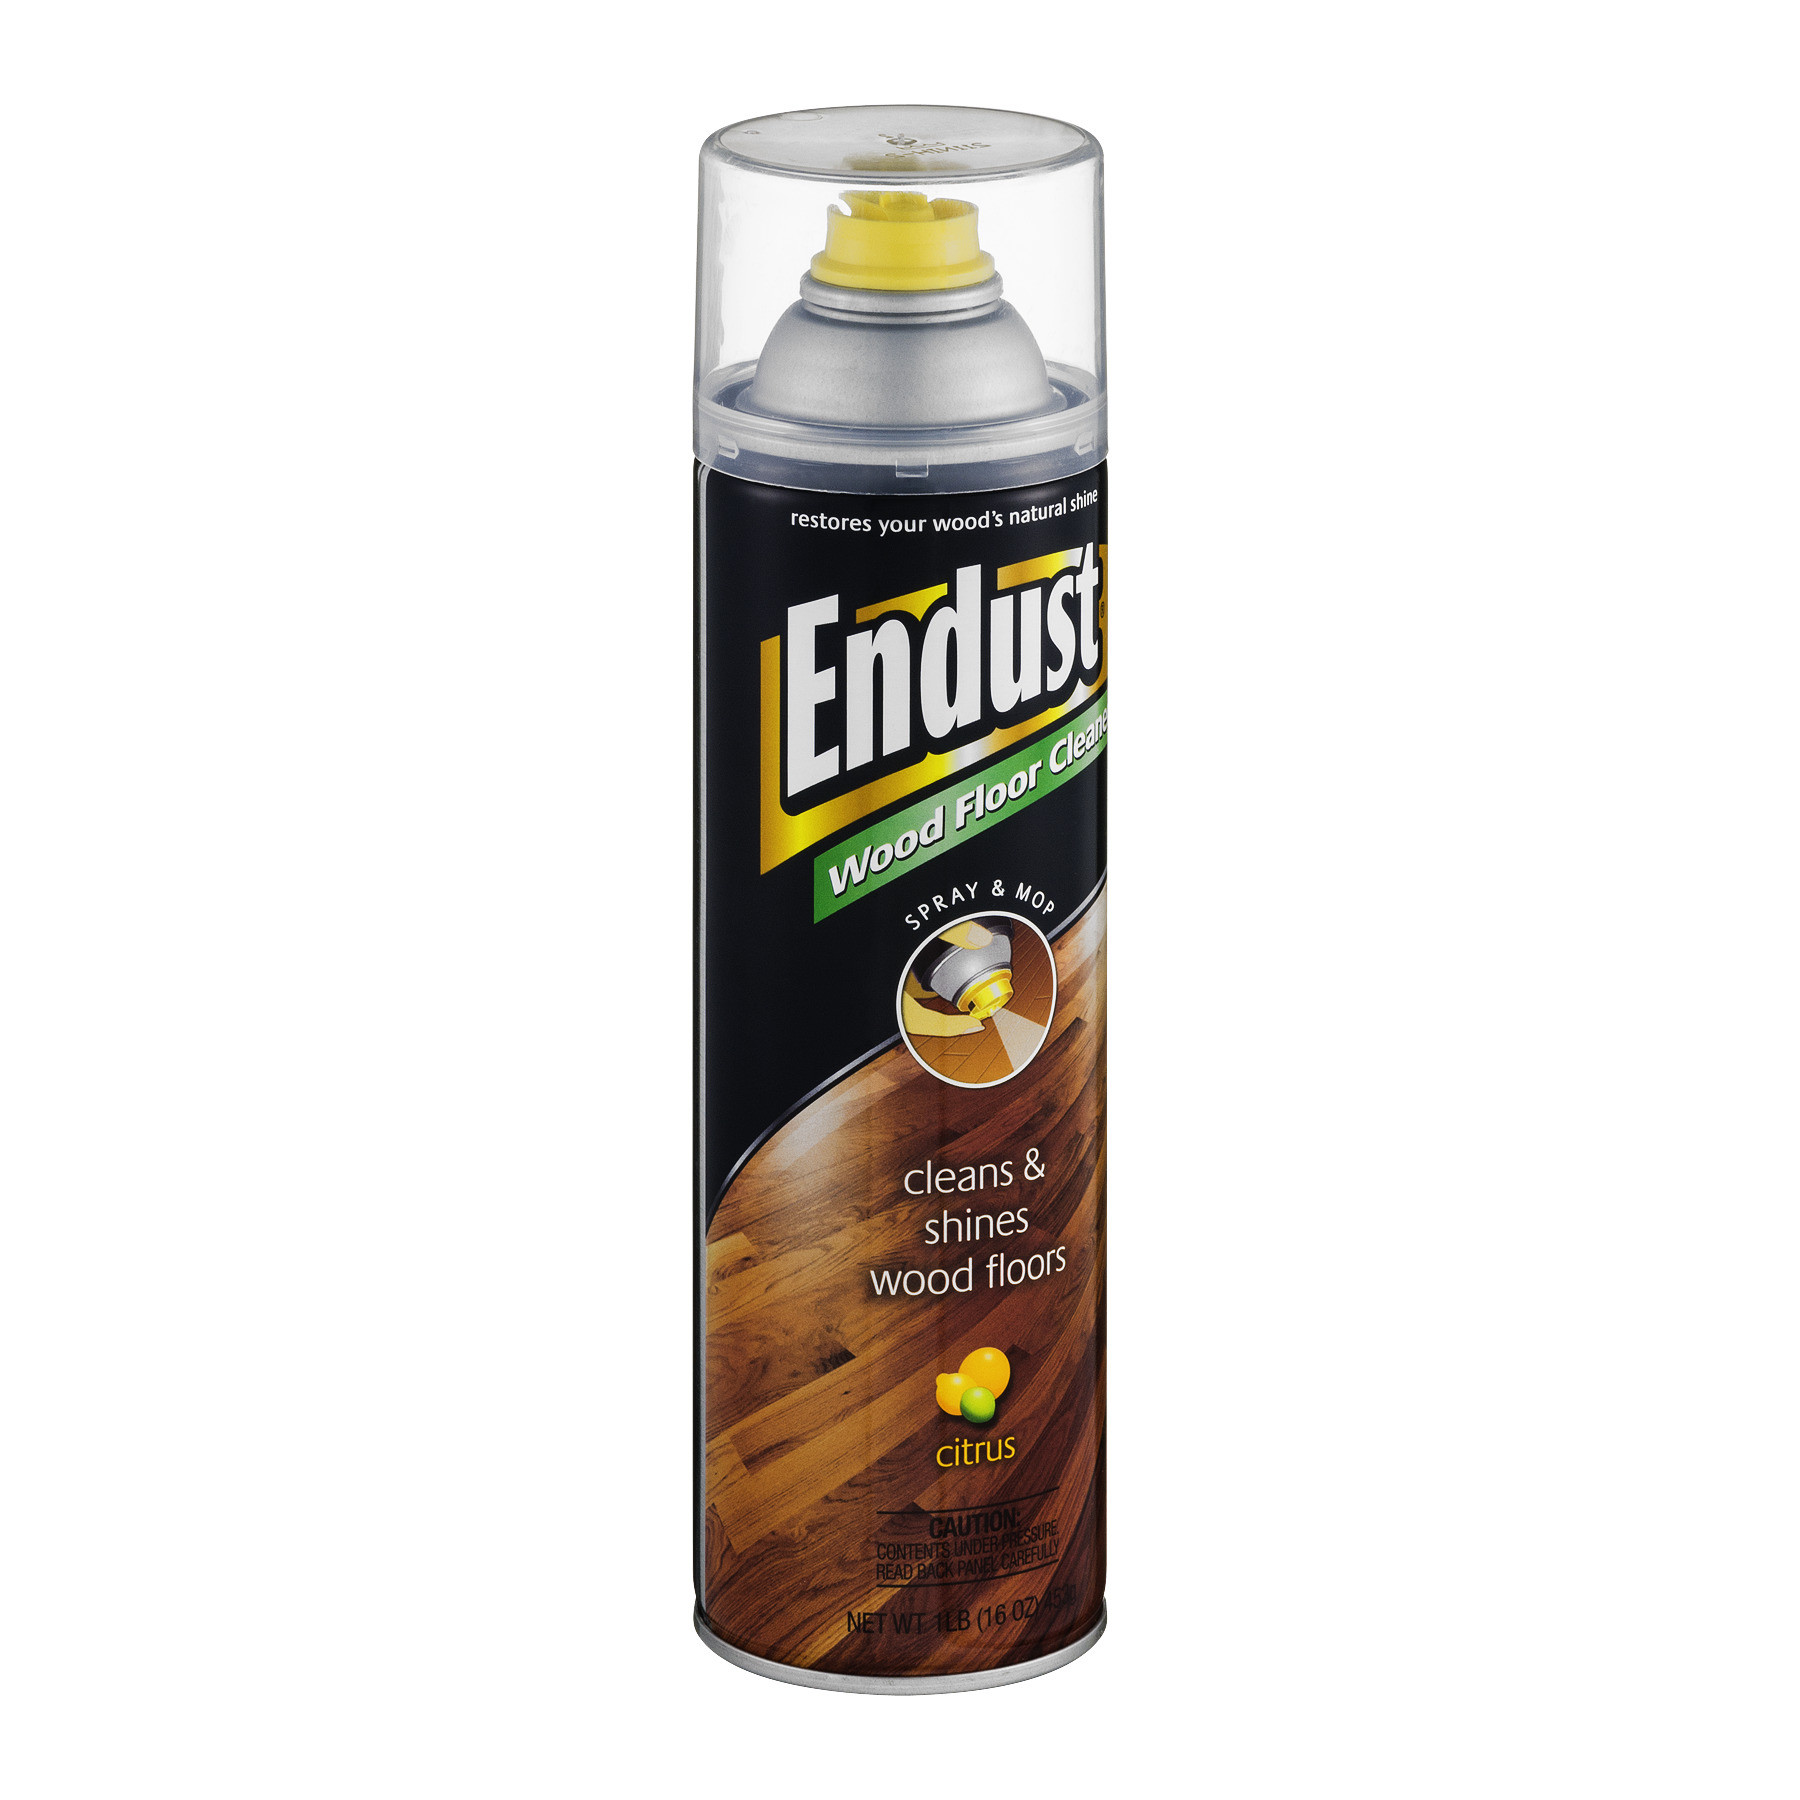 21 Famous Hardwood Floor Cleaners Consumer Reviews 2024 free download hardwood floor cleaners consumer reviews of endust citrus wood floor cleaner 16 oz walmart com for 6aa82809 ebe2 408e bdd2 c187658772c5 1 8ed41dfe4c578f8c36683d60de60209a